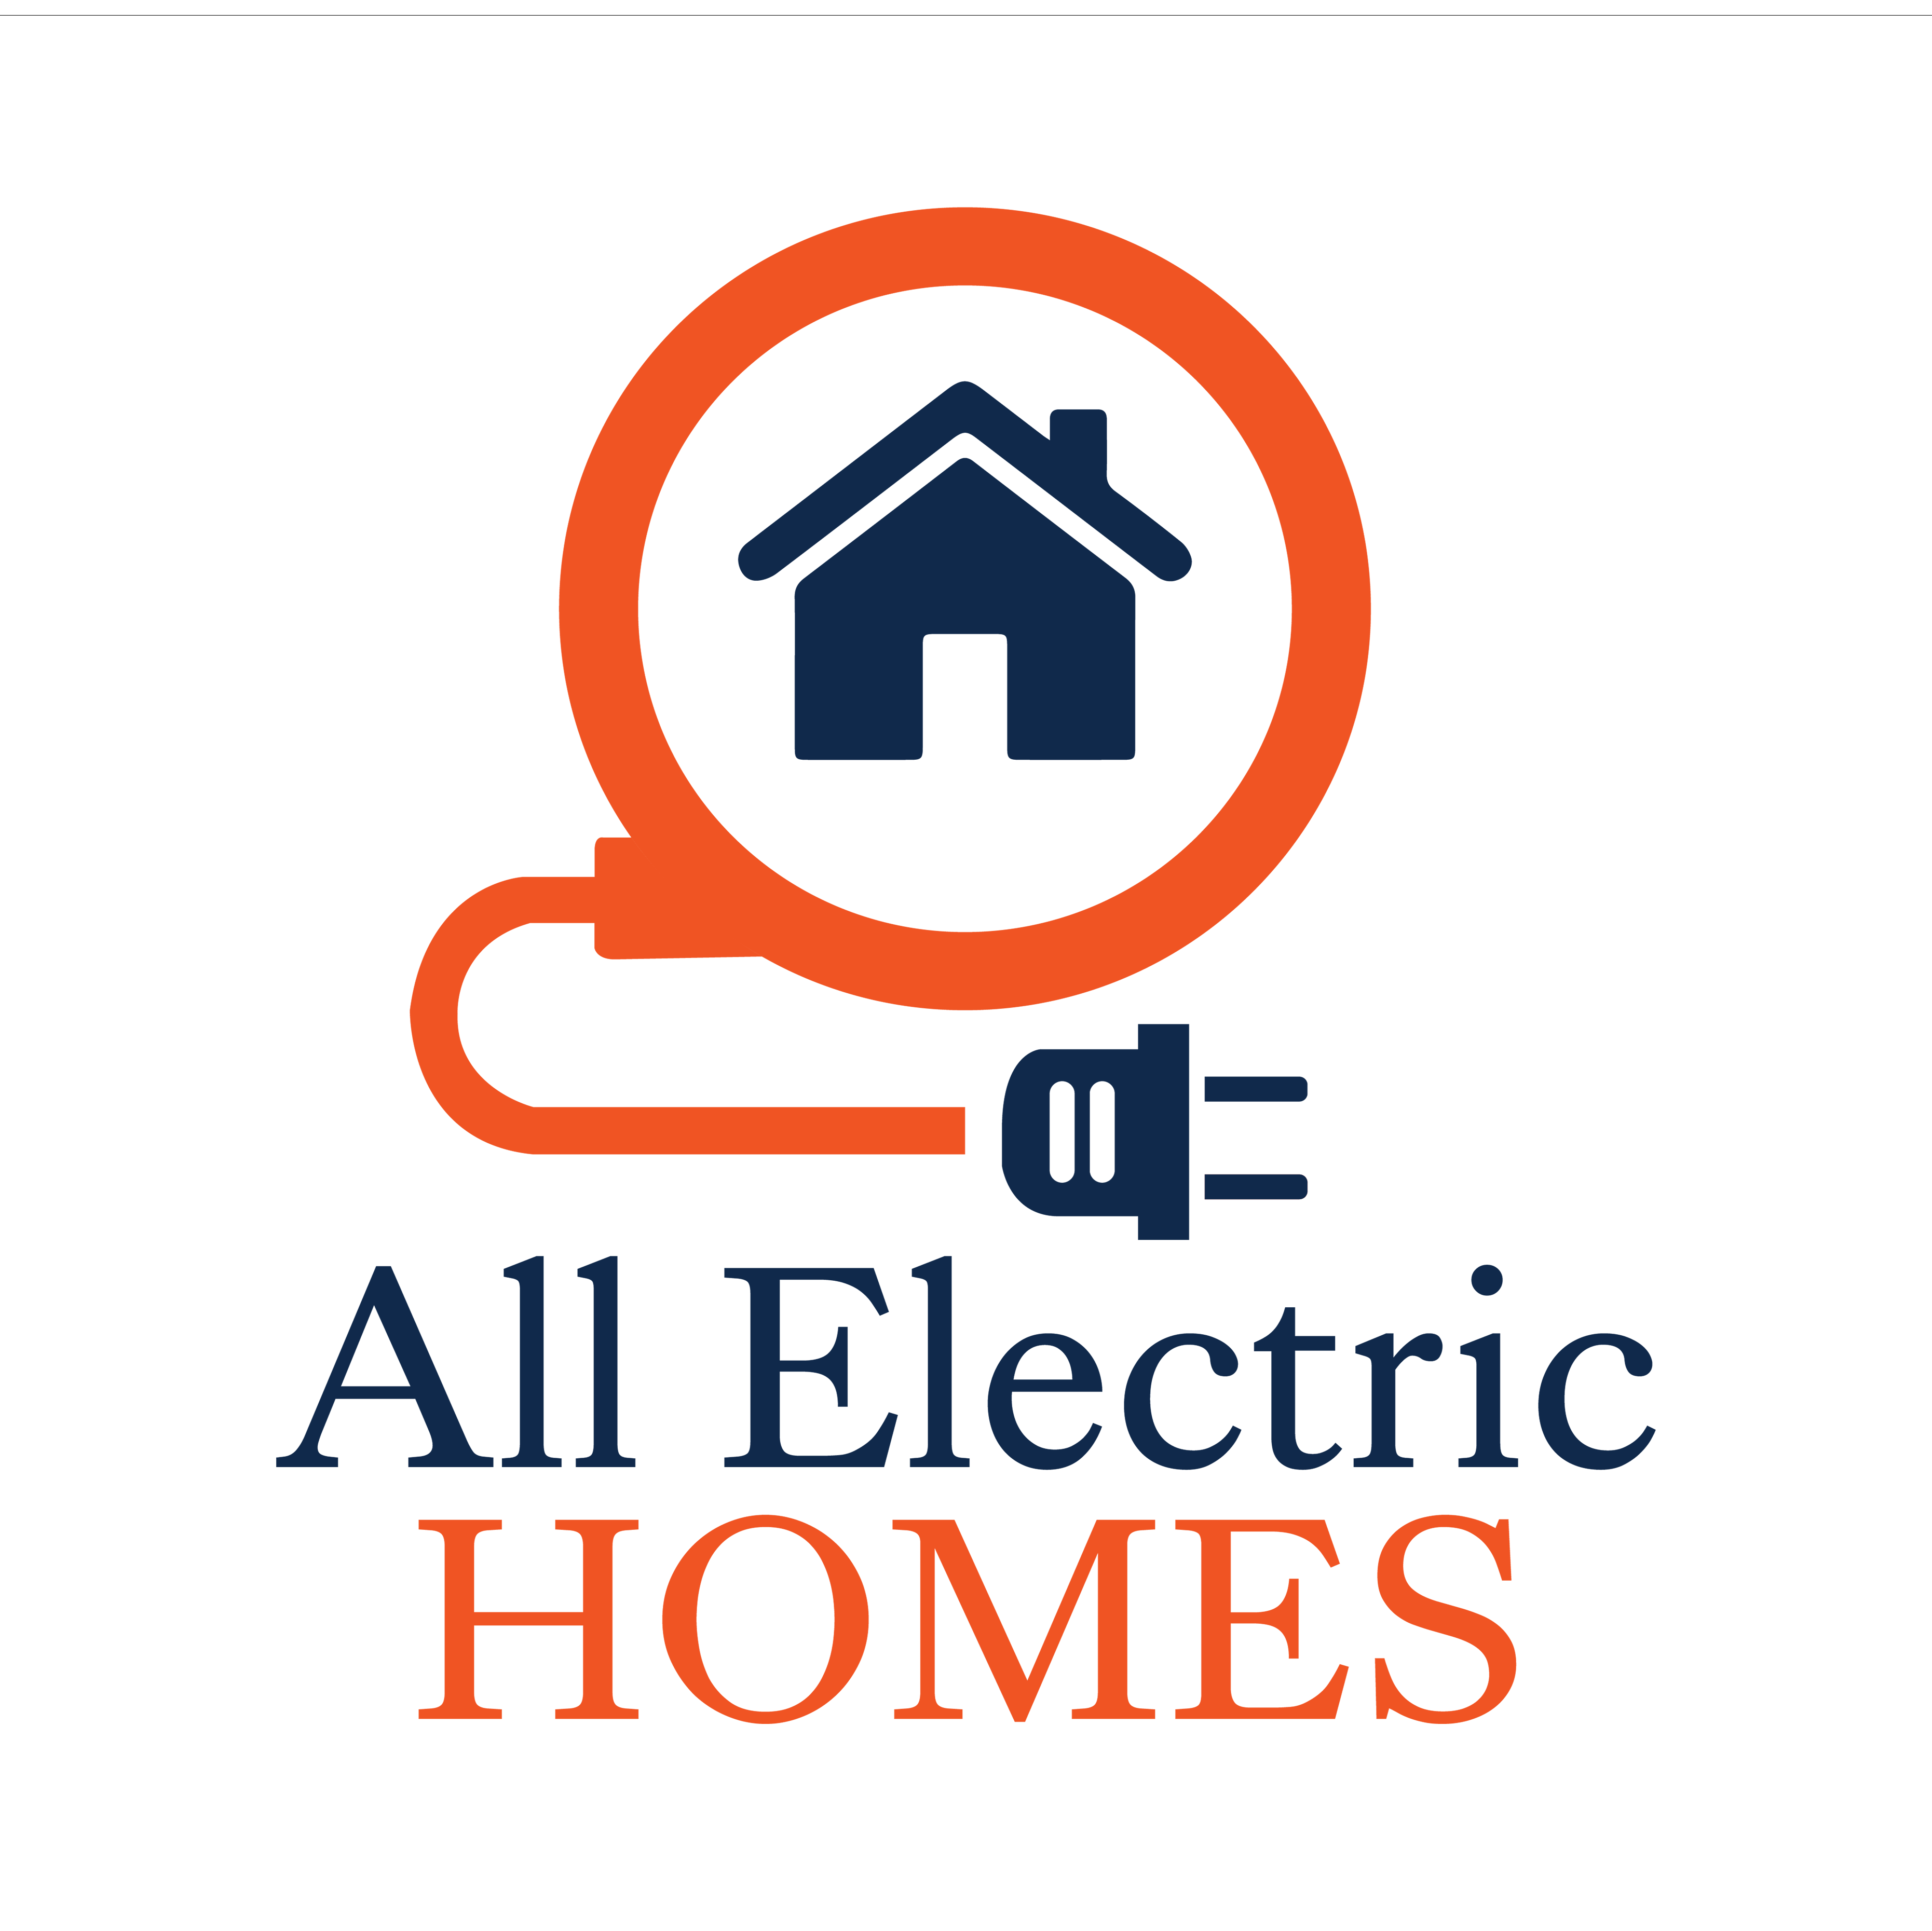 All electric homes